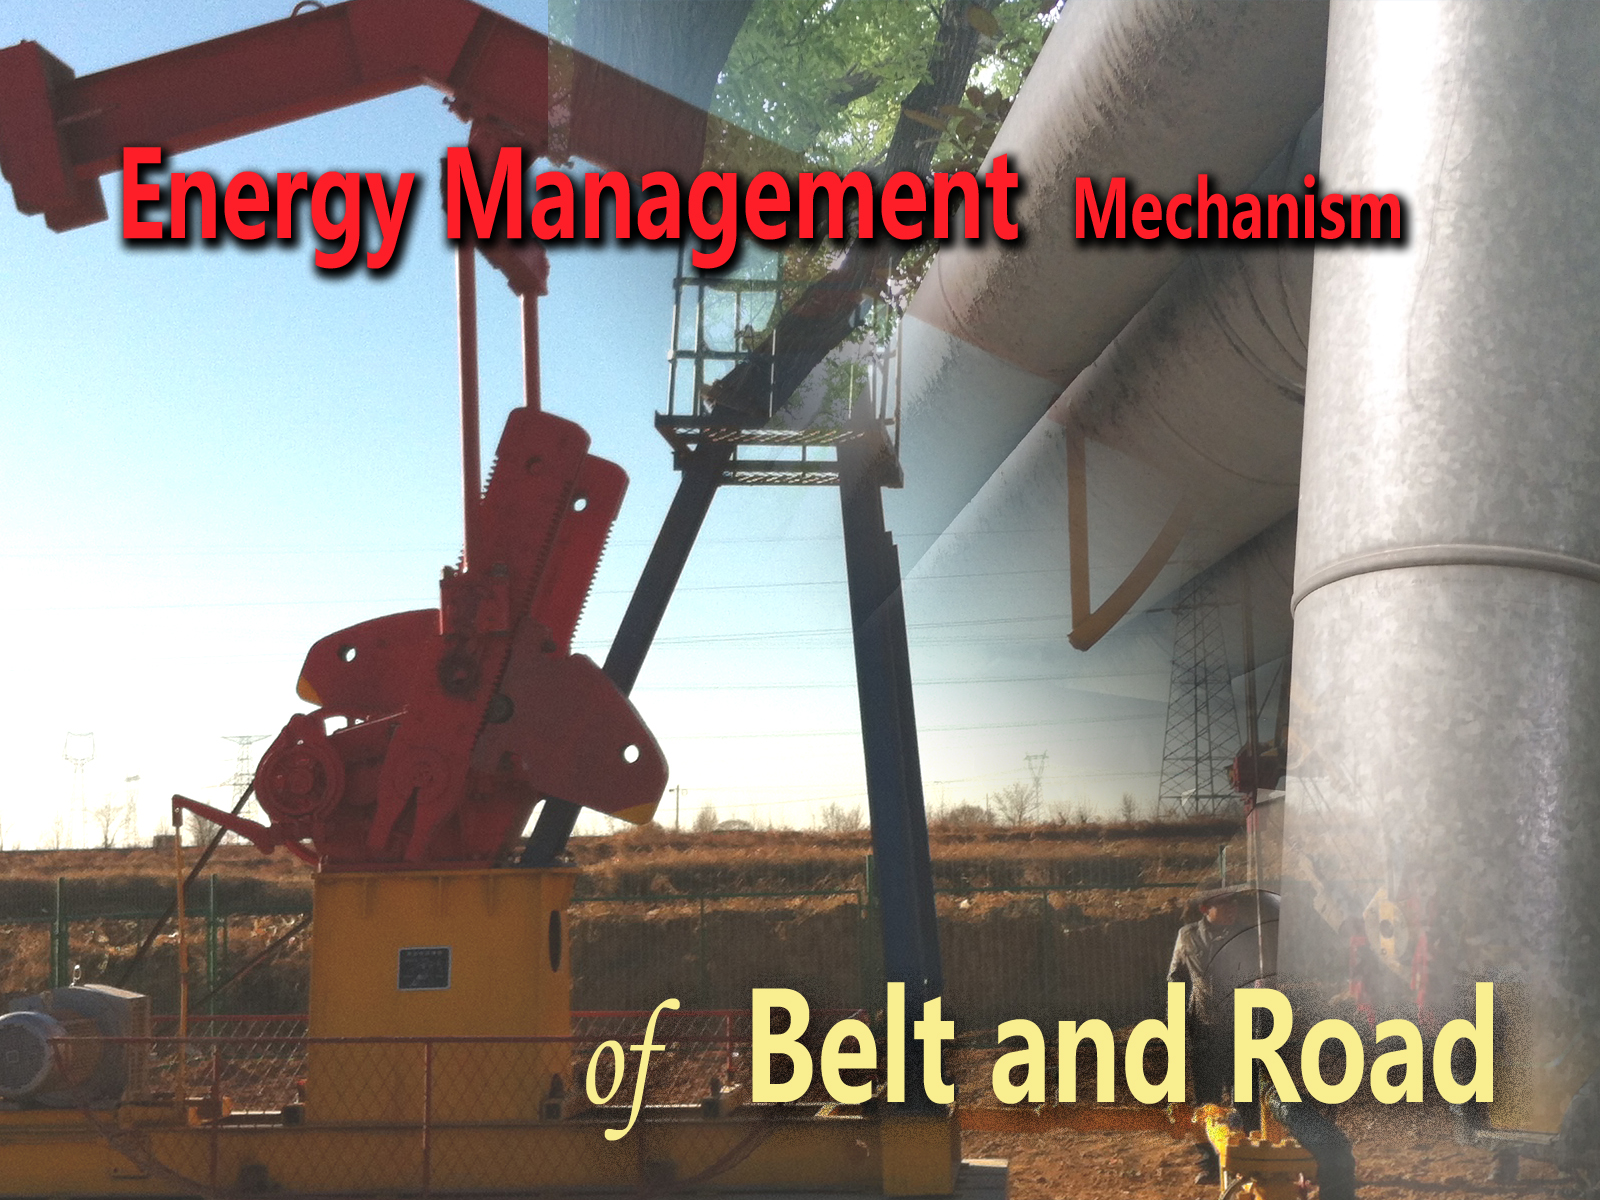 Policy Options on Establishing an Energy Management Mechanism Relating to the Belt and Road Initiative